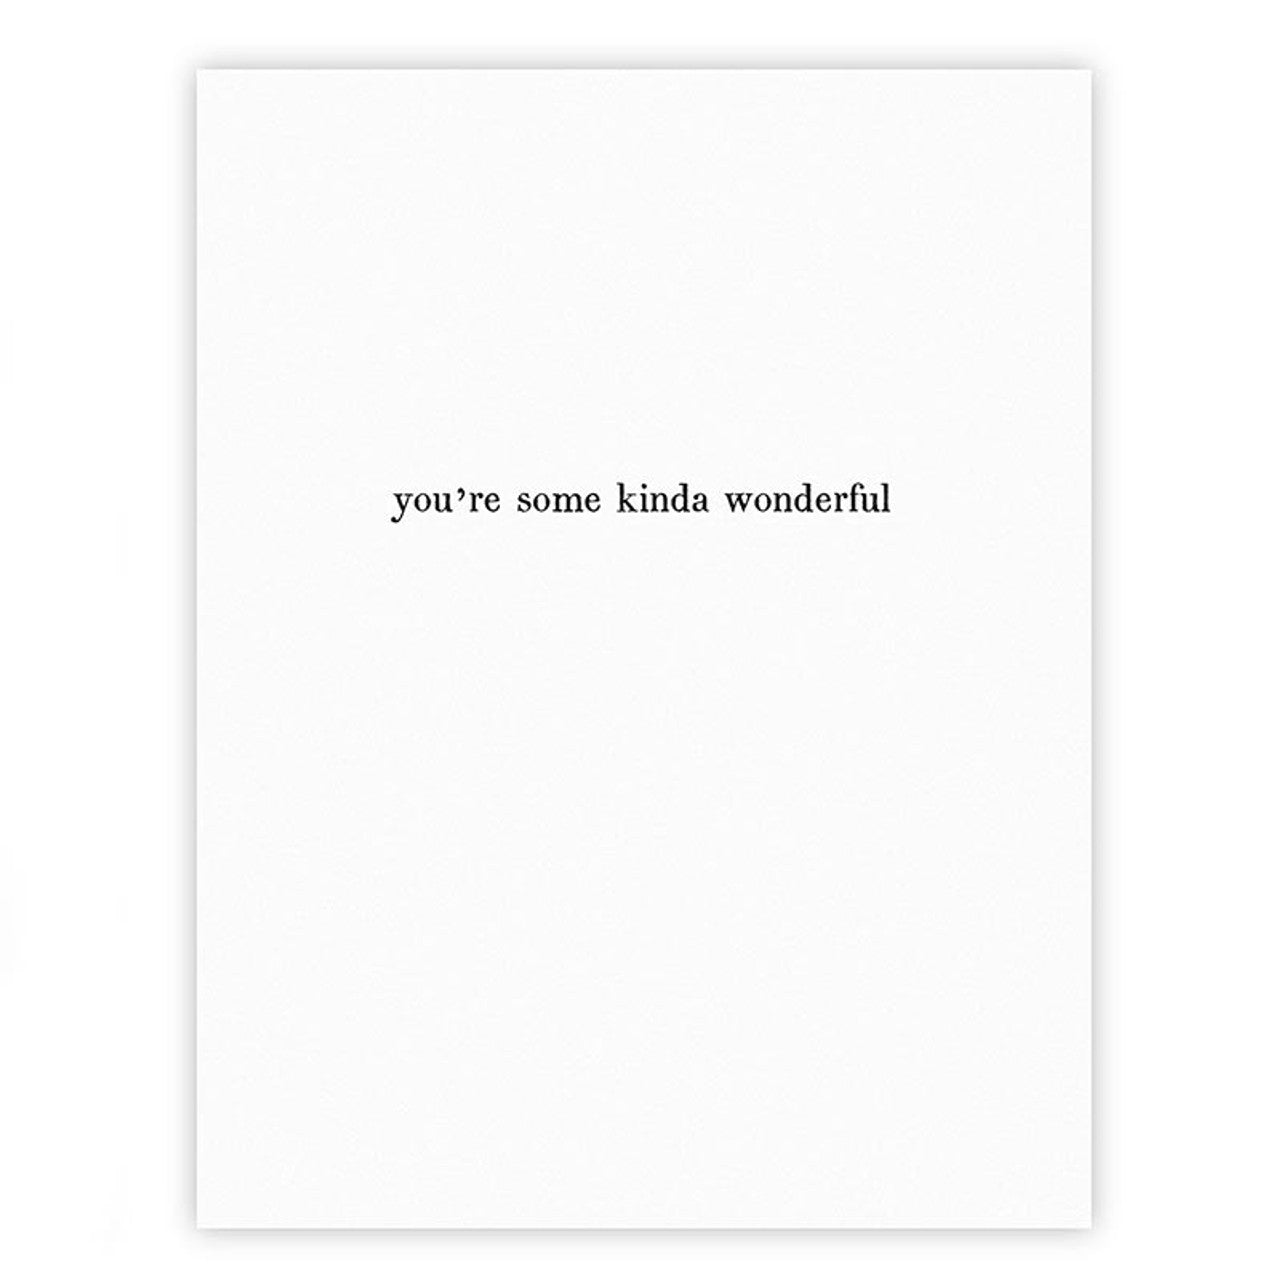 Face to Face Greeting Cards - I Like A Letter - Set of 6